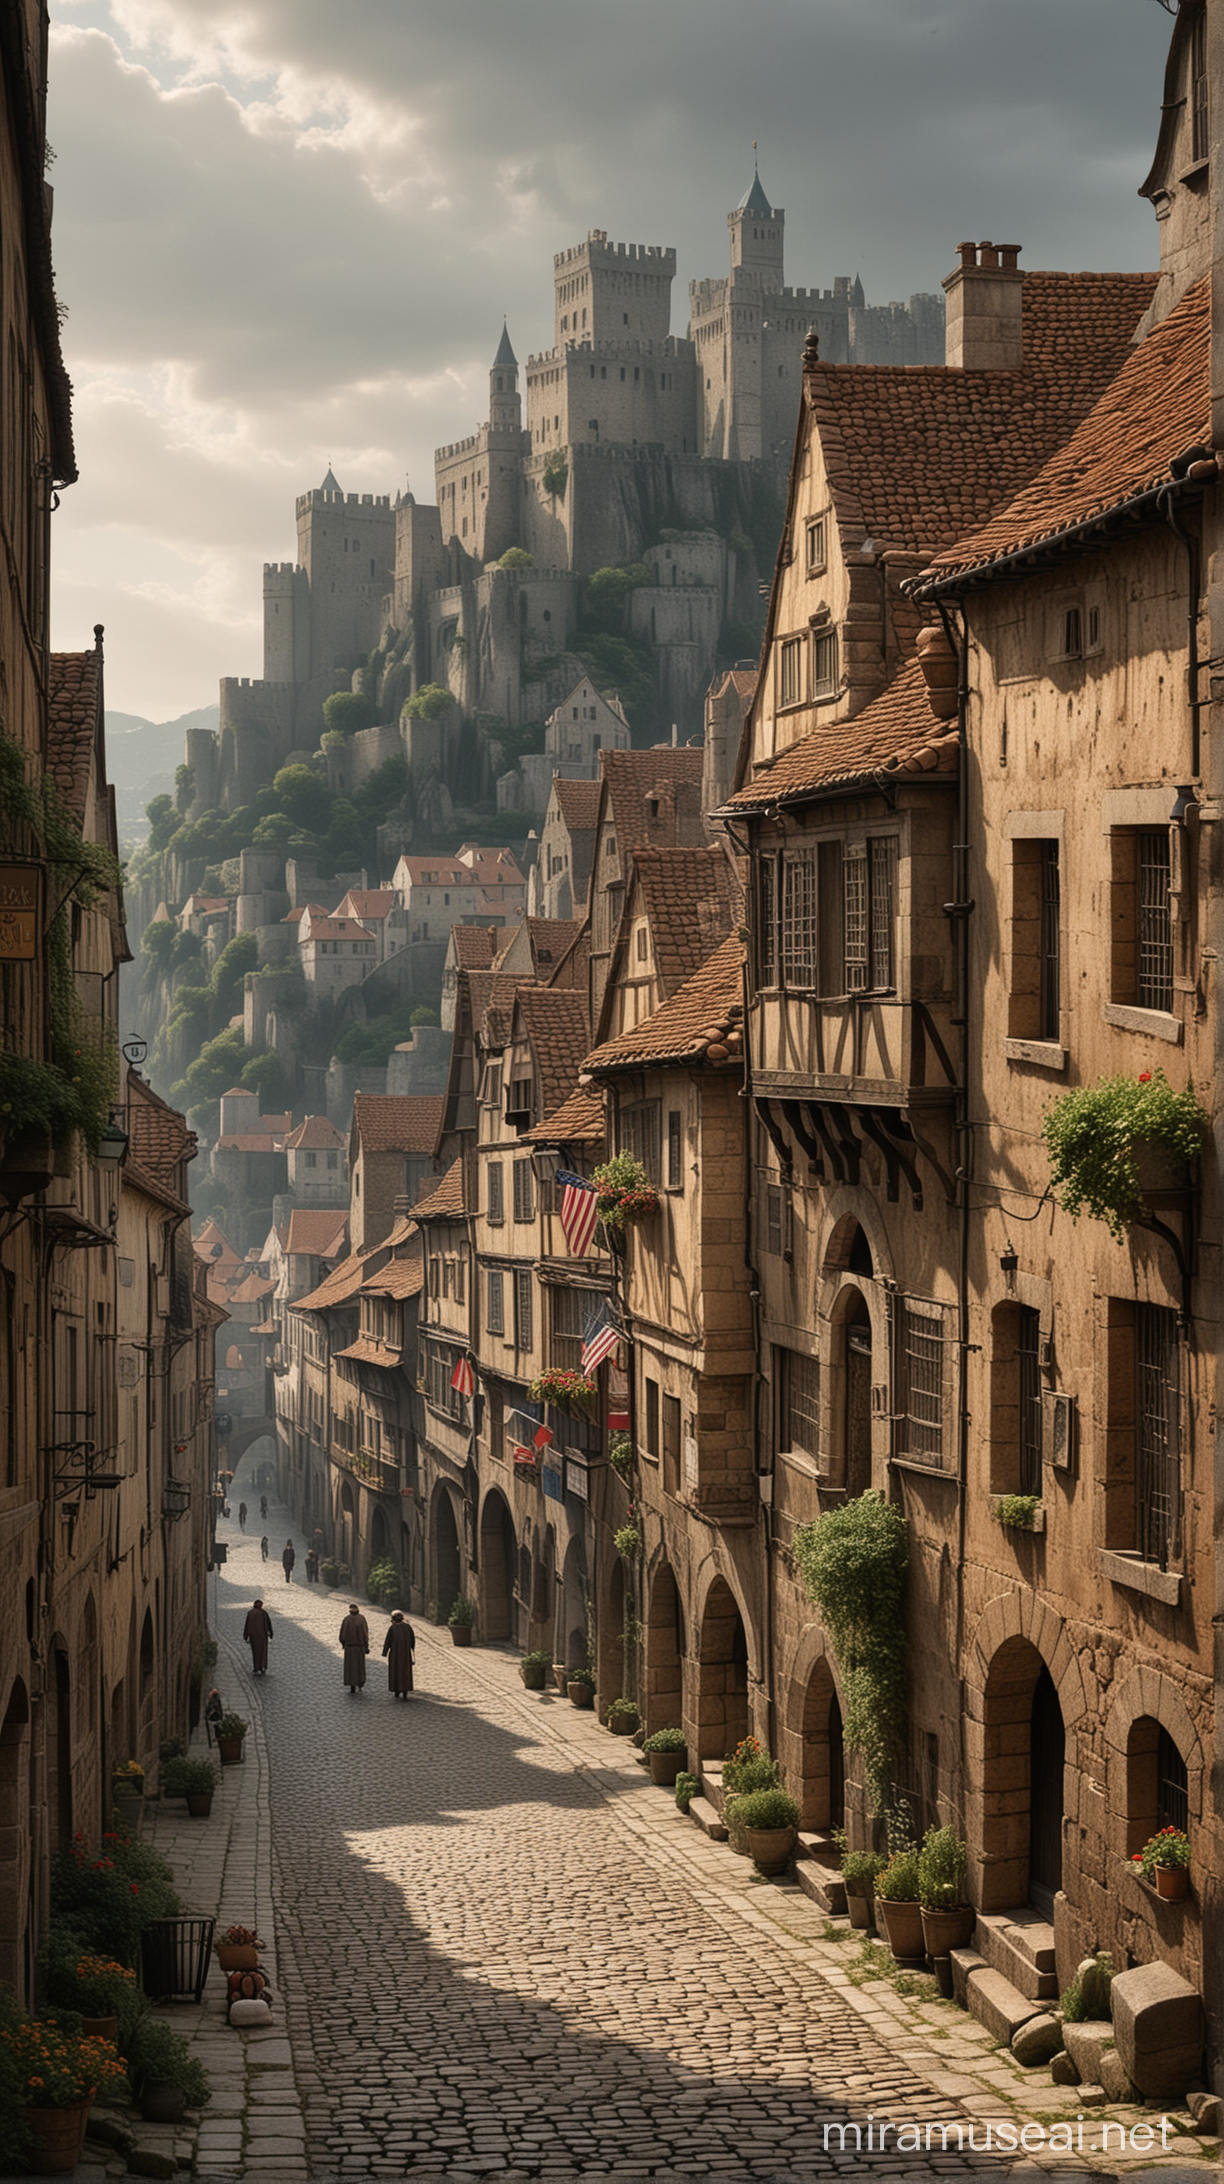 Include visual cues such as bustling streets, fortified walls, and prominent landmarks to convey the unique identity and pride of each city in a moody nature in 13th century